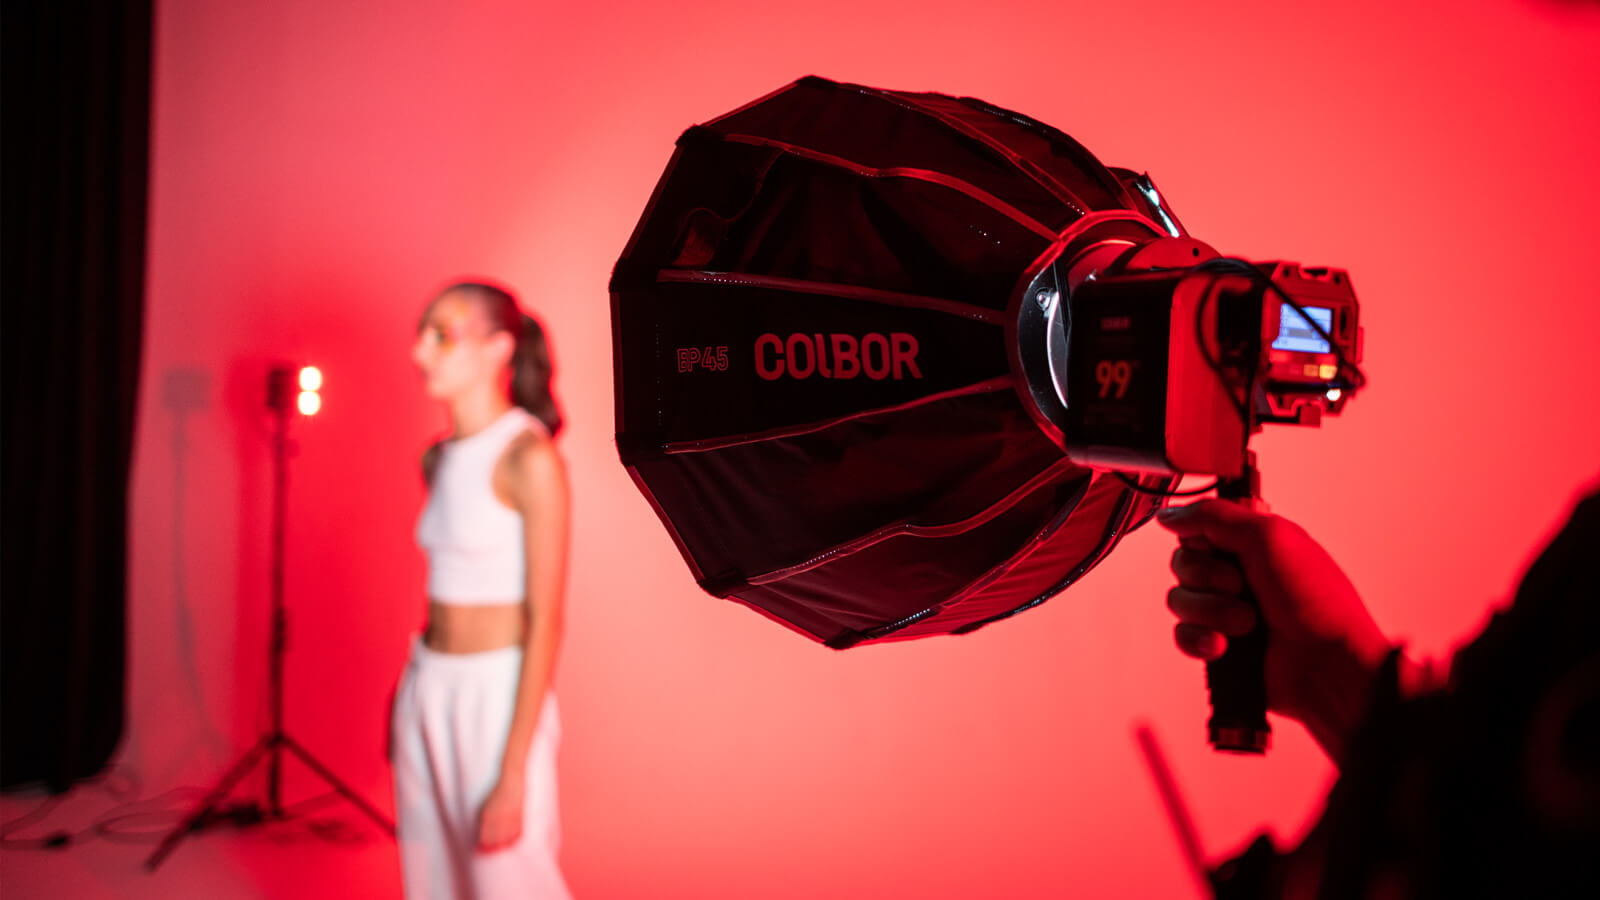 COLBOR CL60R is used with BP45 to offer softbox lighting for YouTube videos.